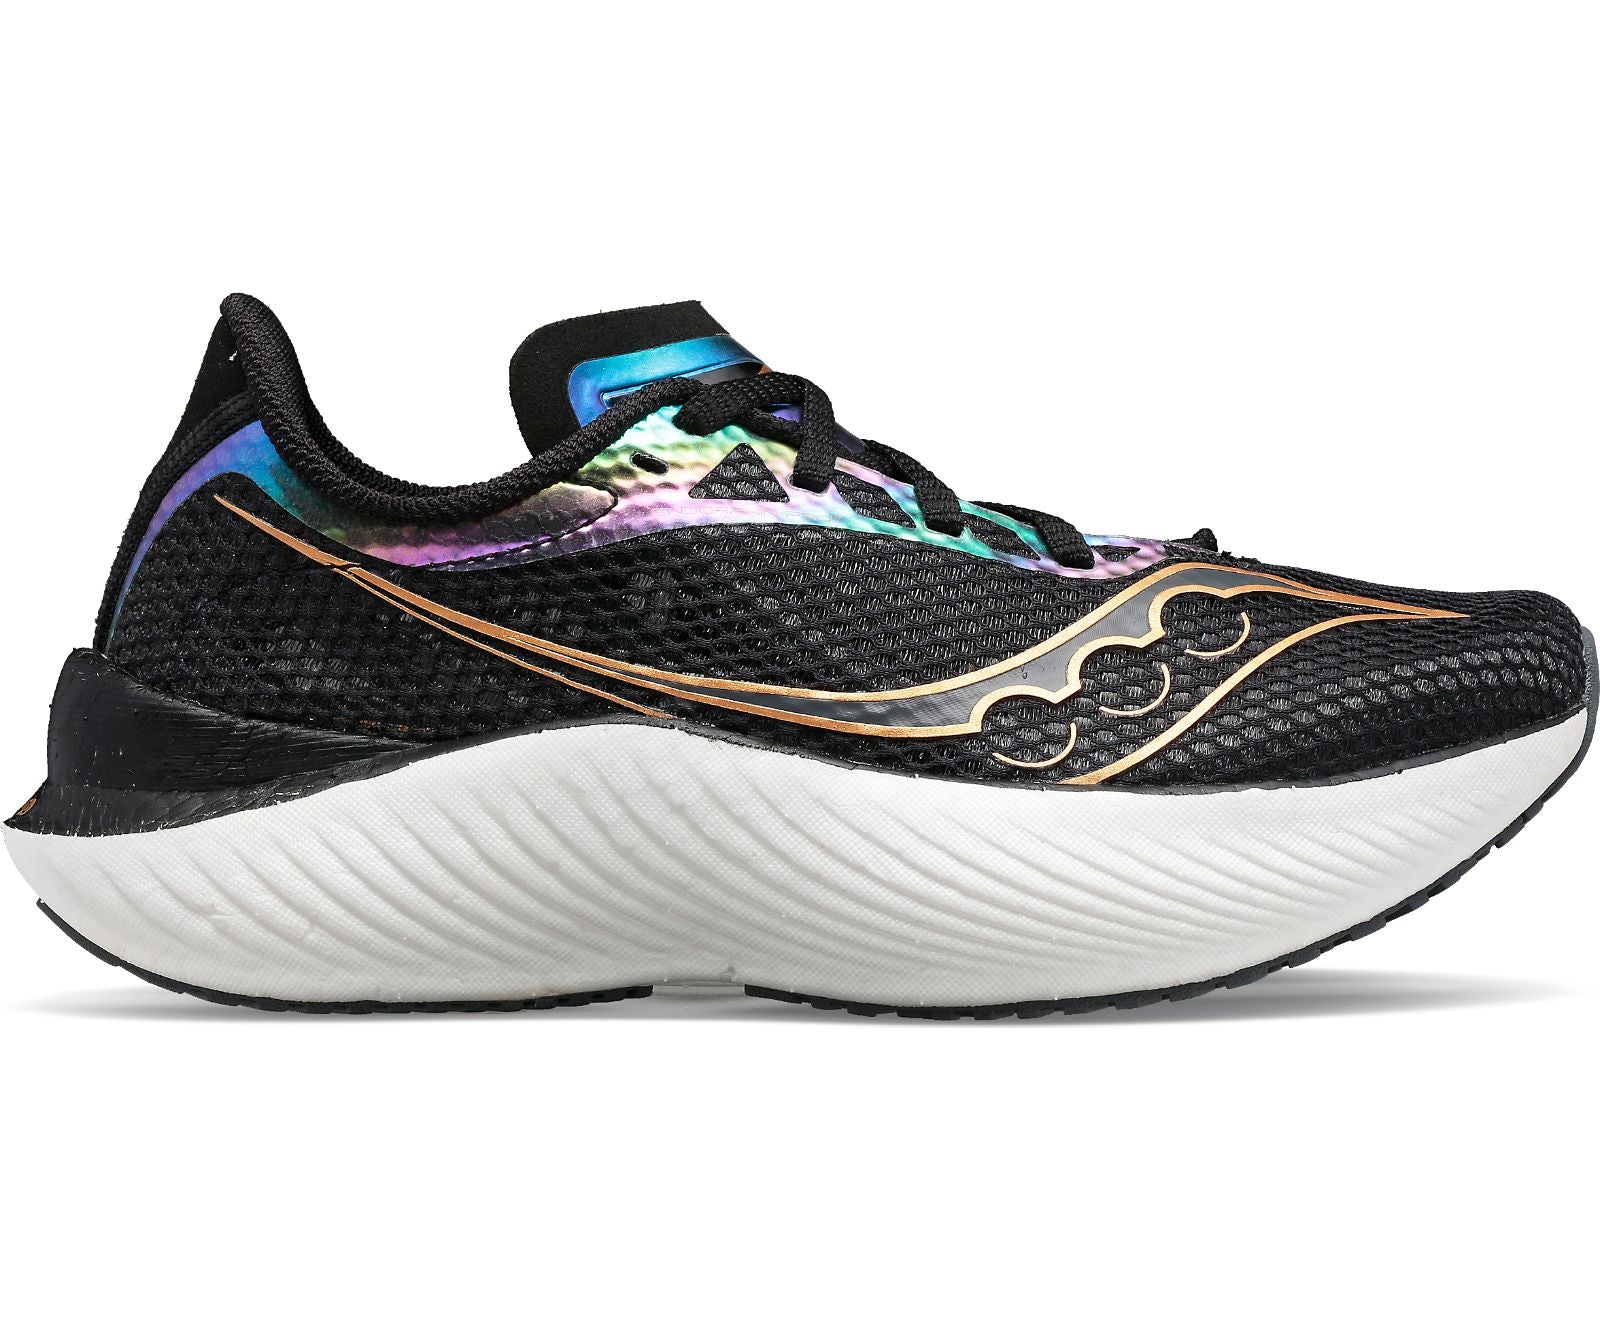 Lateral view of the Women's Endorphin Pro 3 by Saucony in the color Black/Goldstruck